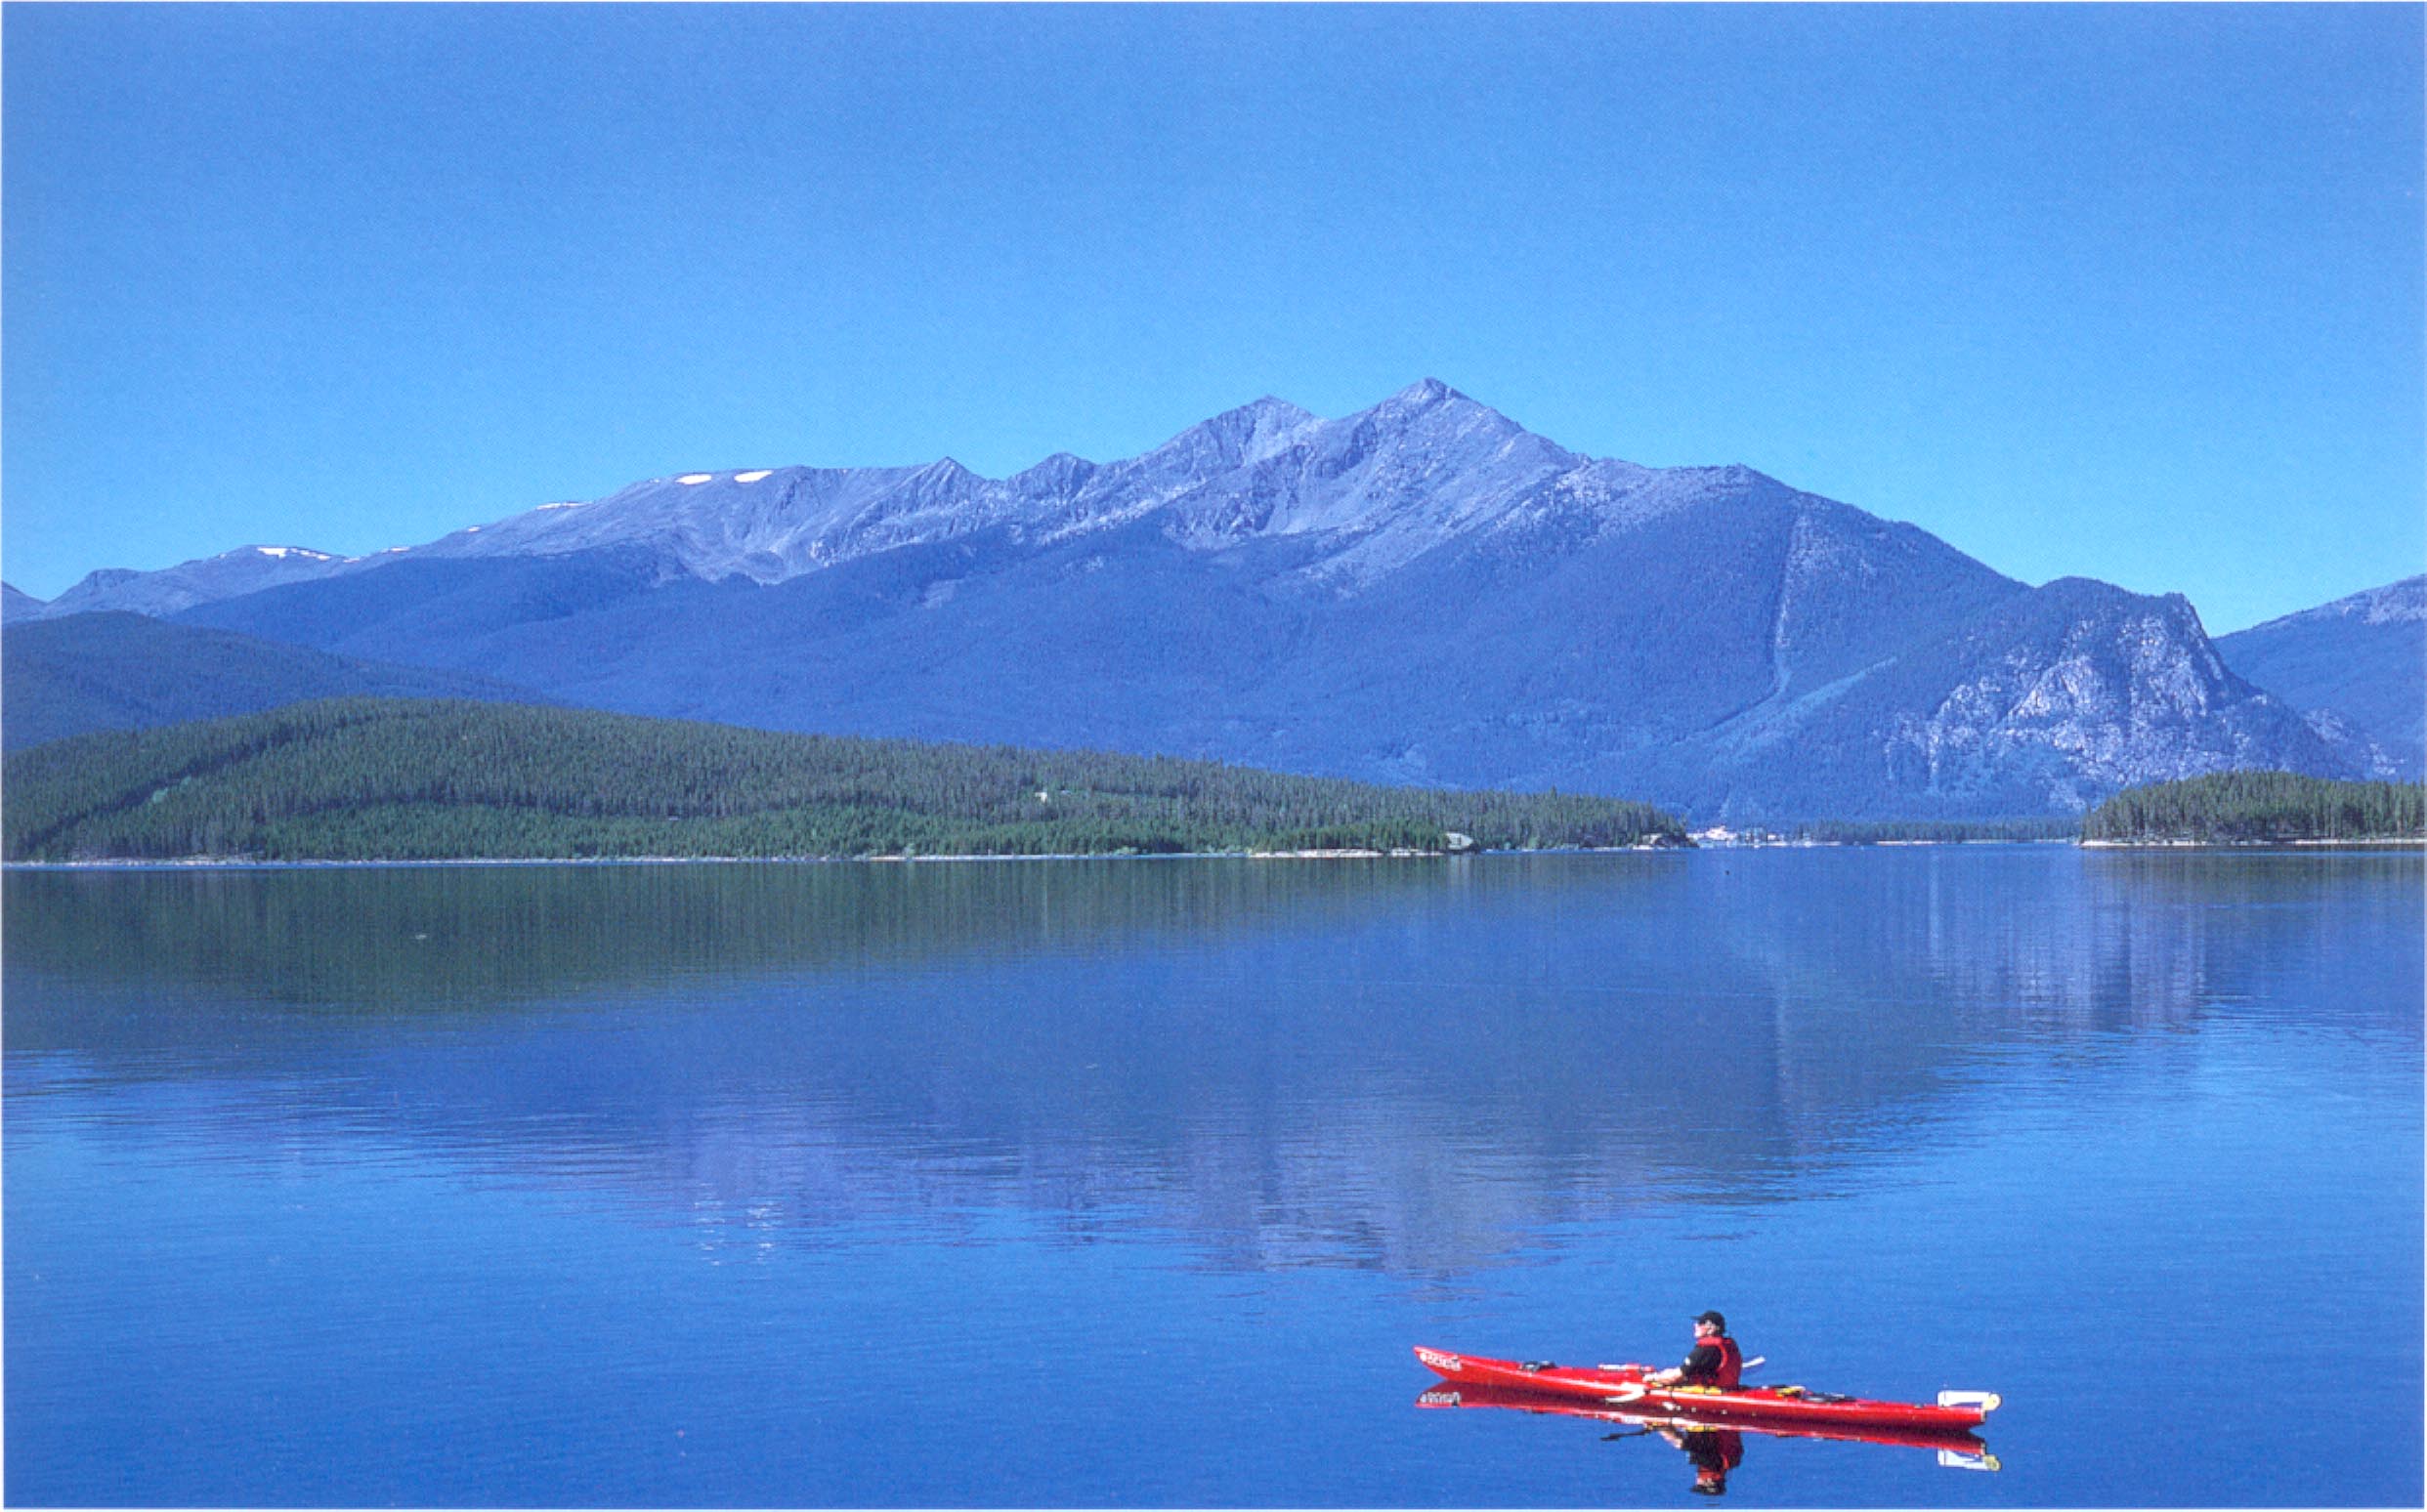 Dillon Reservoir in the summer of 2000.